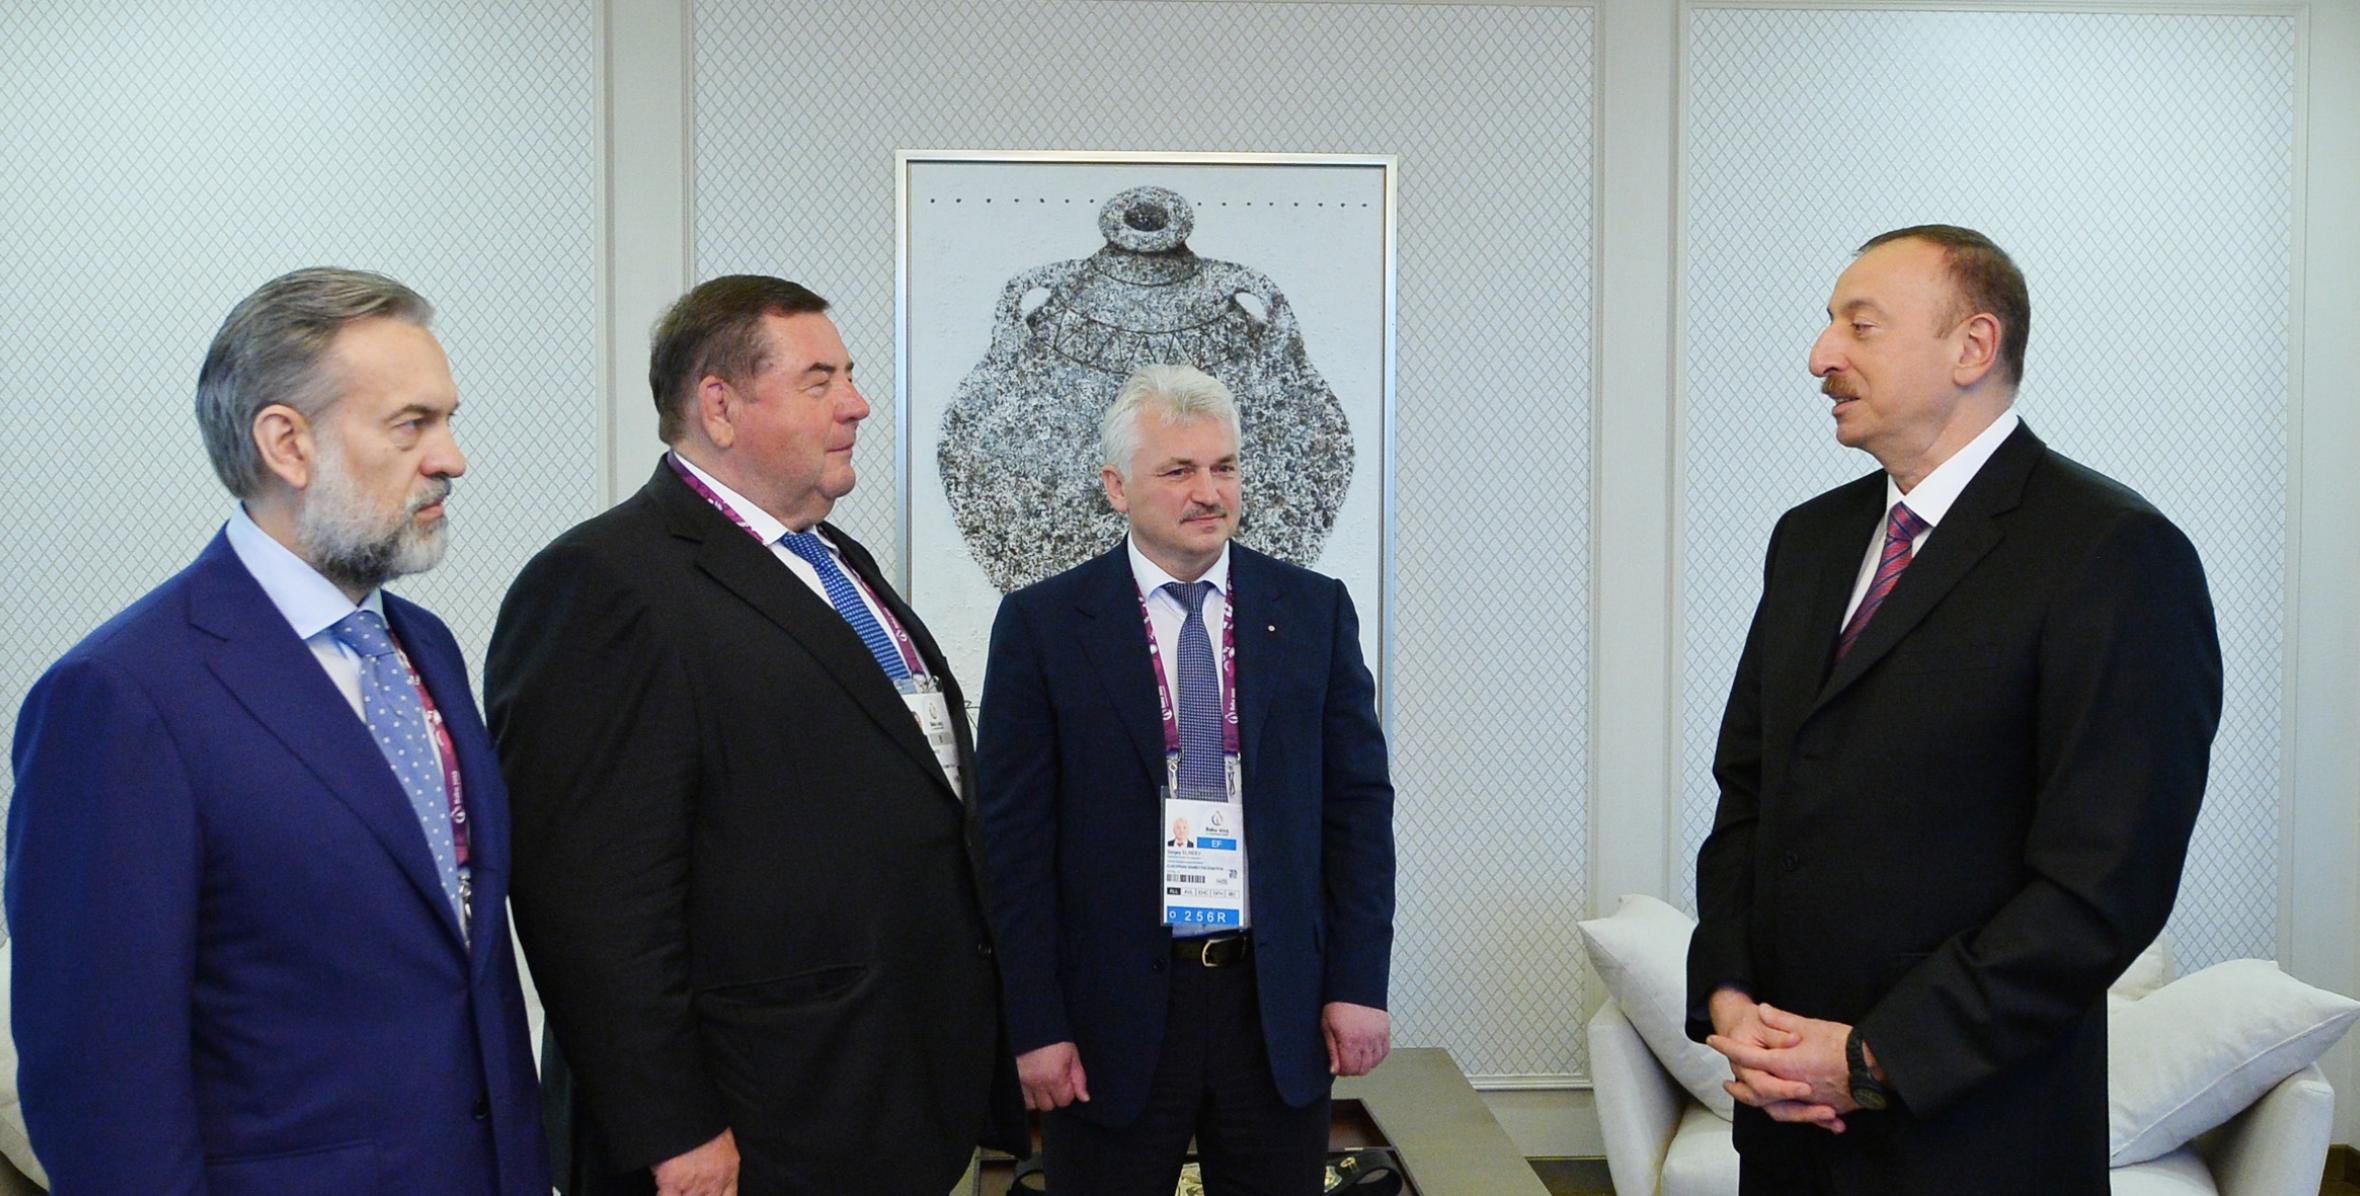 Ilham Aliyev was presented with the Championship belt of sambo by the decision of the Executive Committee of the International Sambo Federation